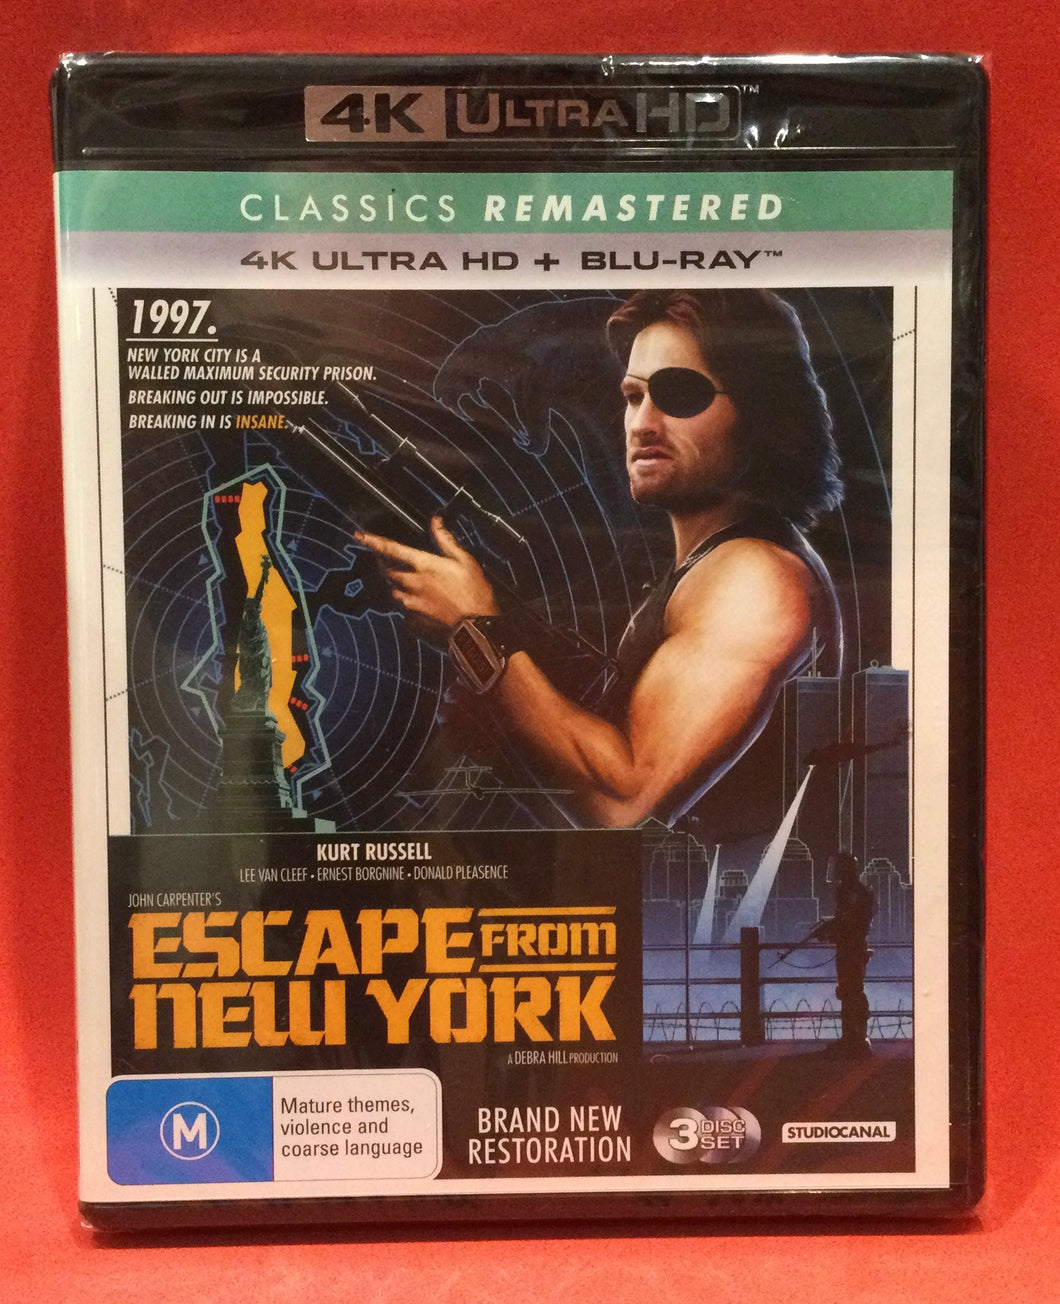 ESCAPE FROM NEW YORK - 4K ULTRA HD + BLU-RAY - 3 DISCS (SEALED)